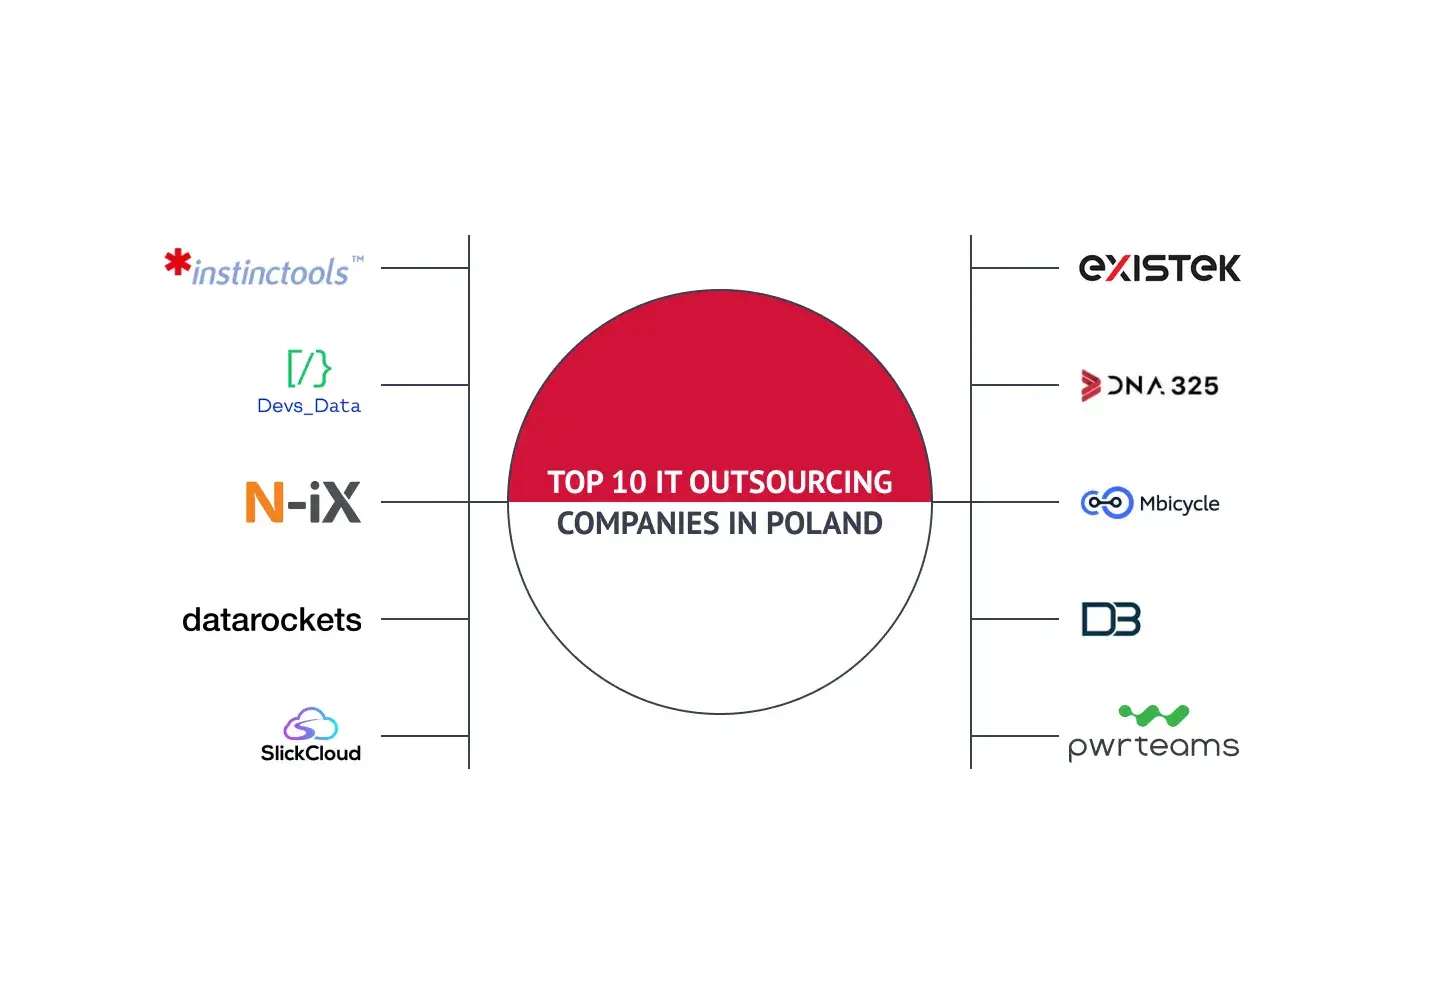 Top IT outsourcing companies in Poland